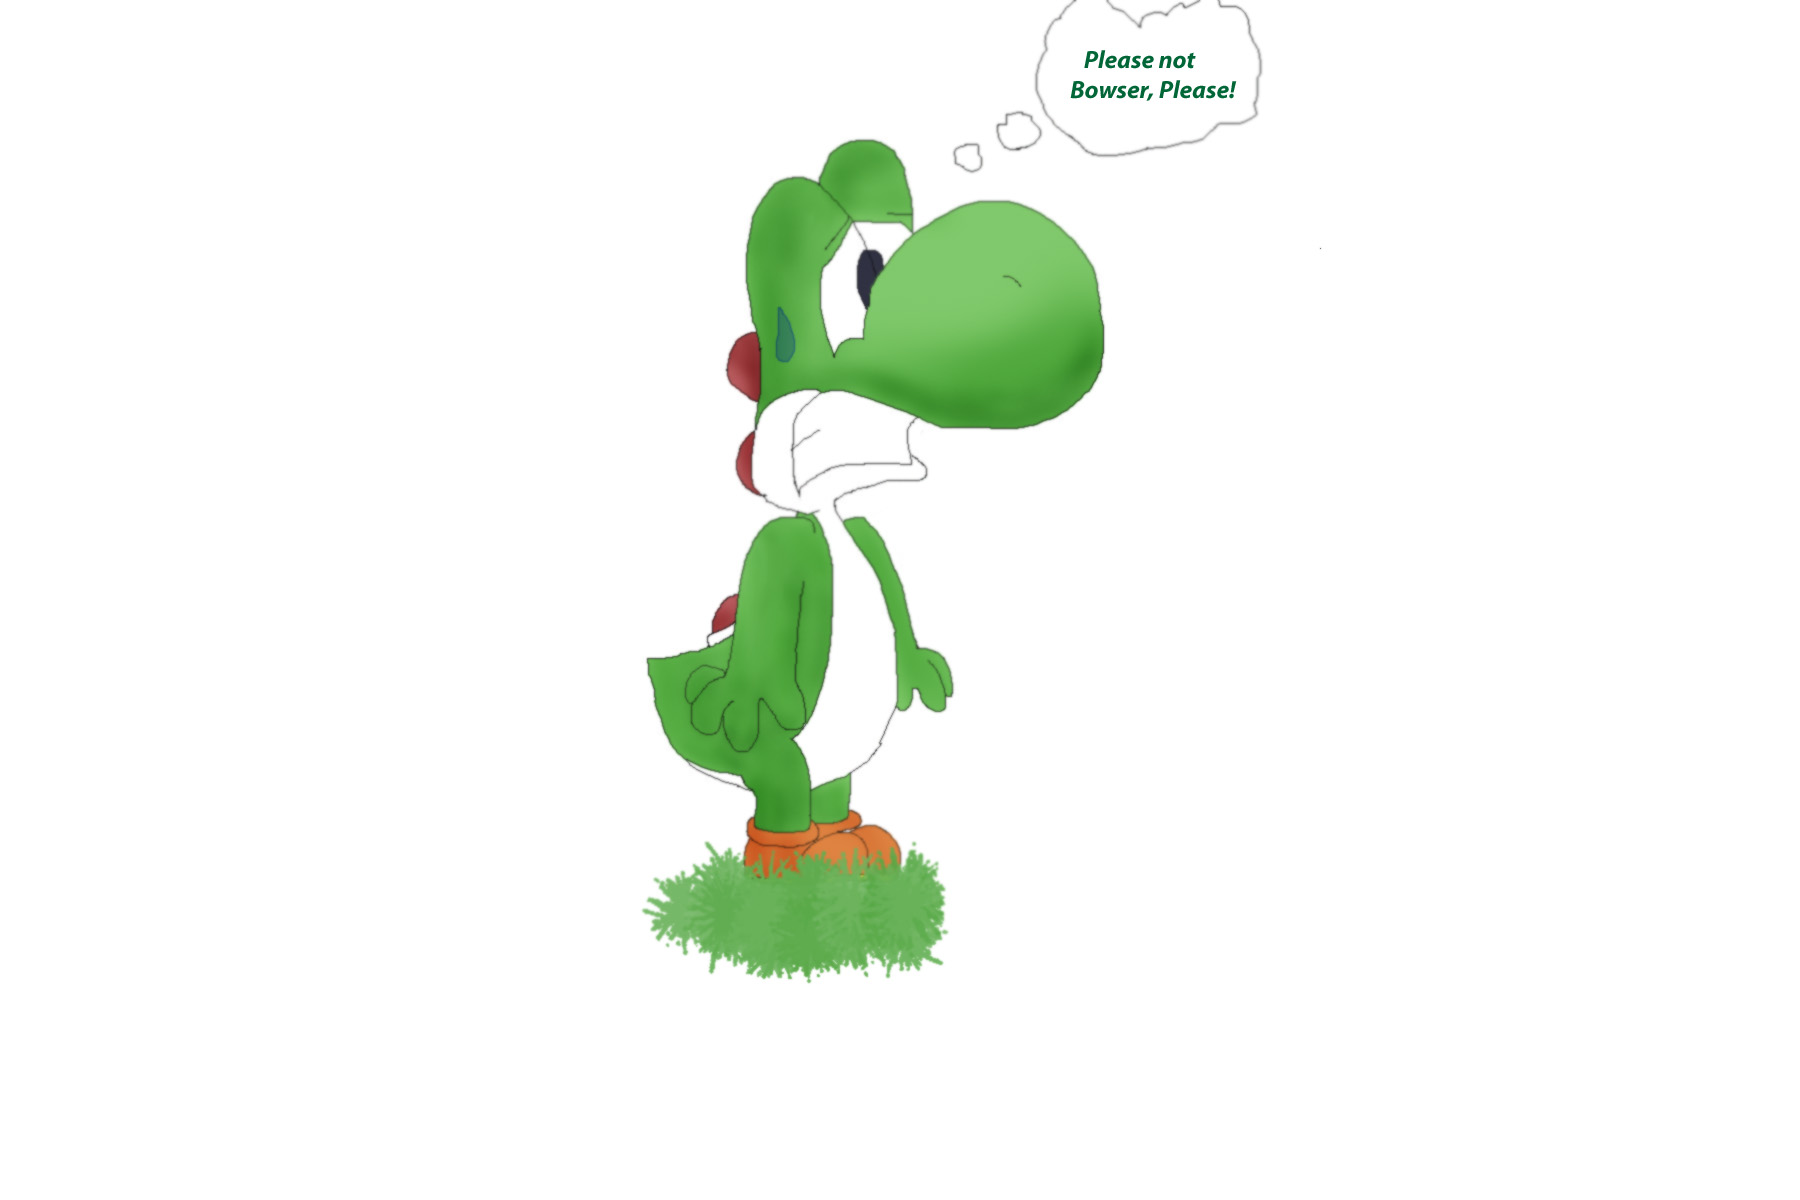 Fan Art of Please don't be him! for fans of Yoshi. 